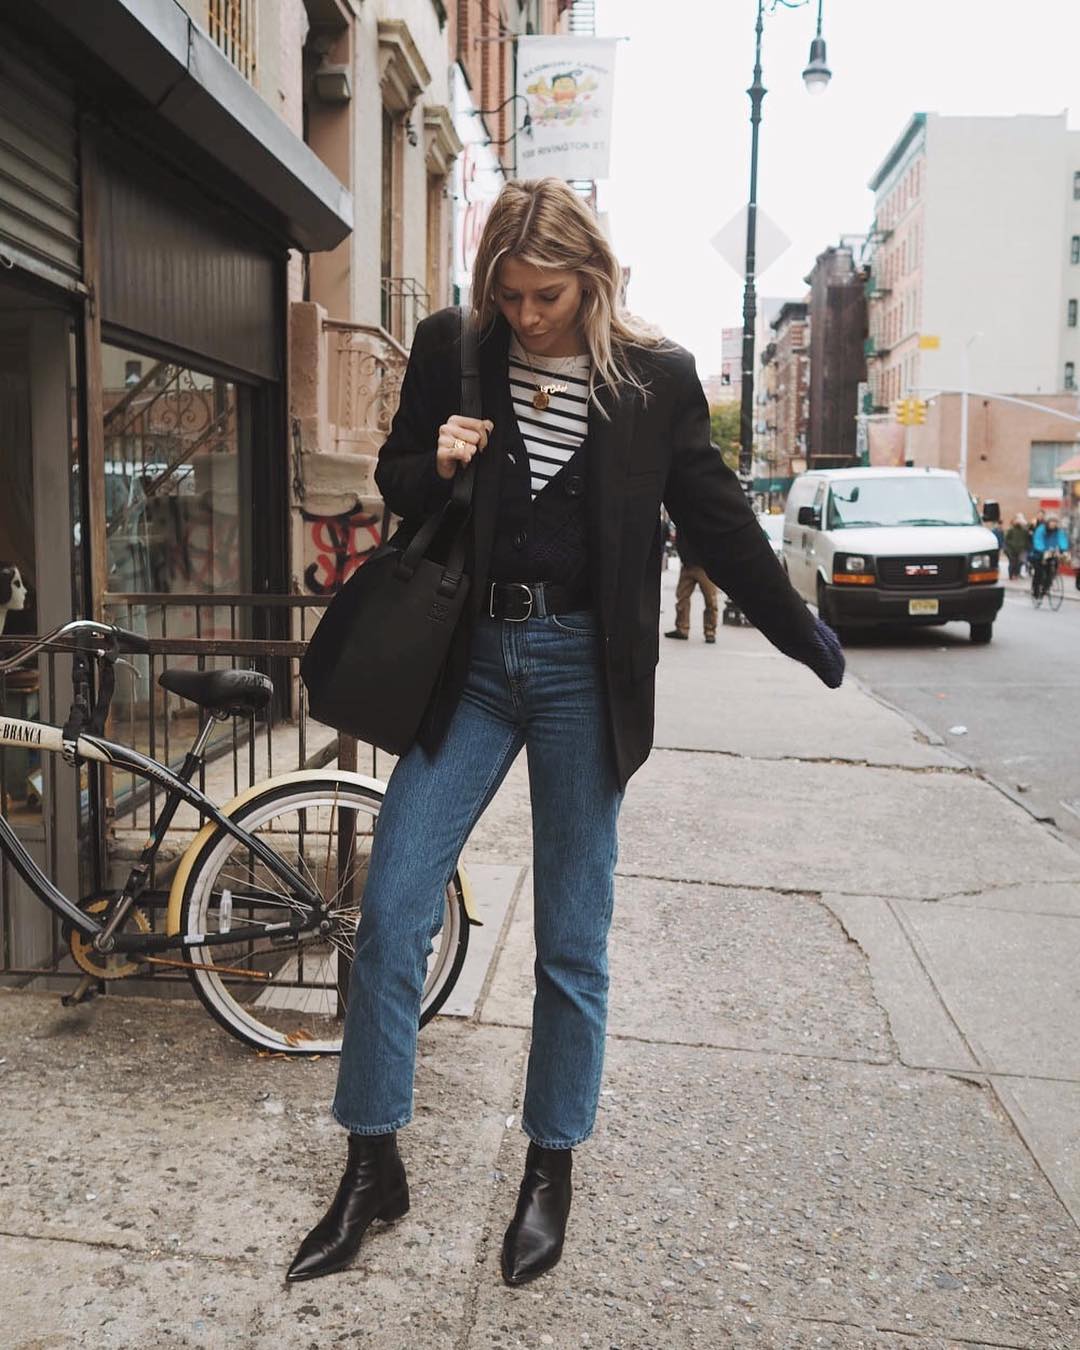 How to Master a Layered Fall Look Like a British Girl